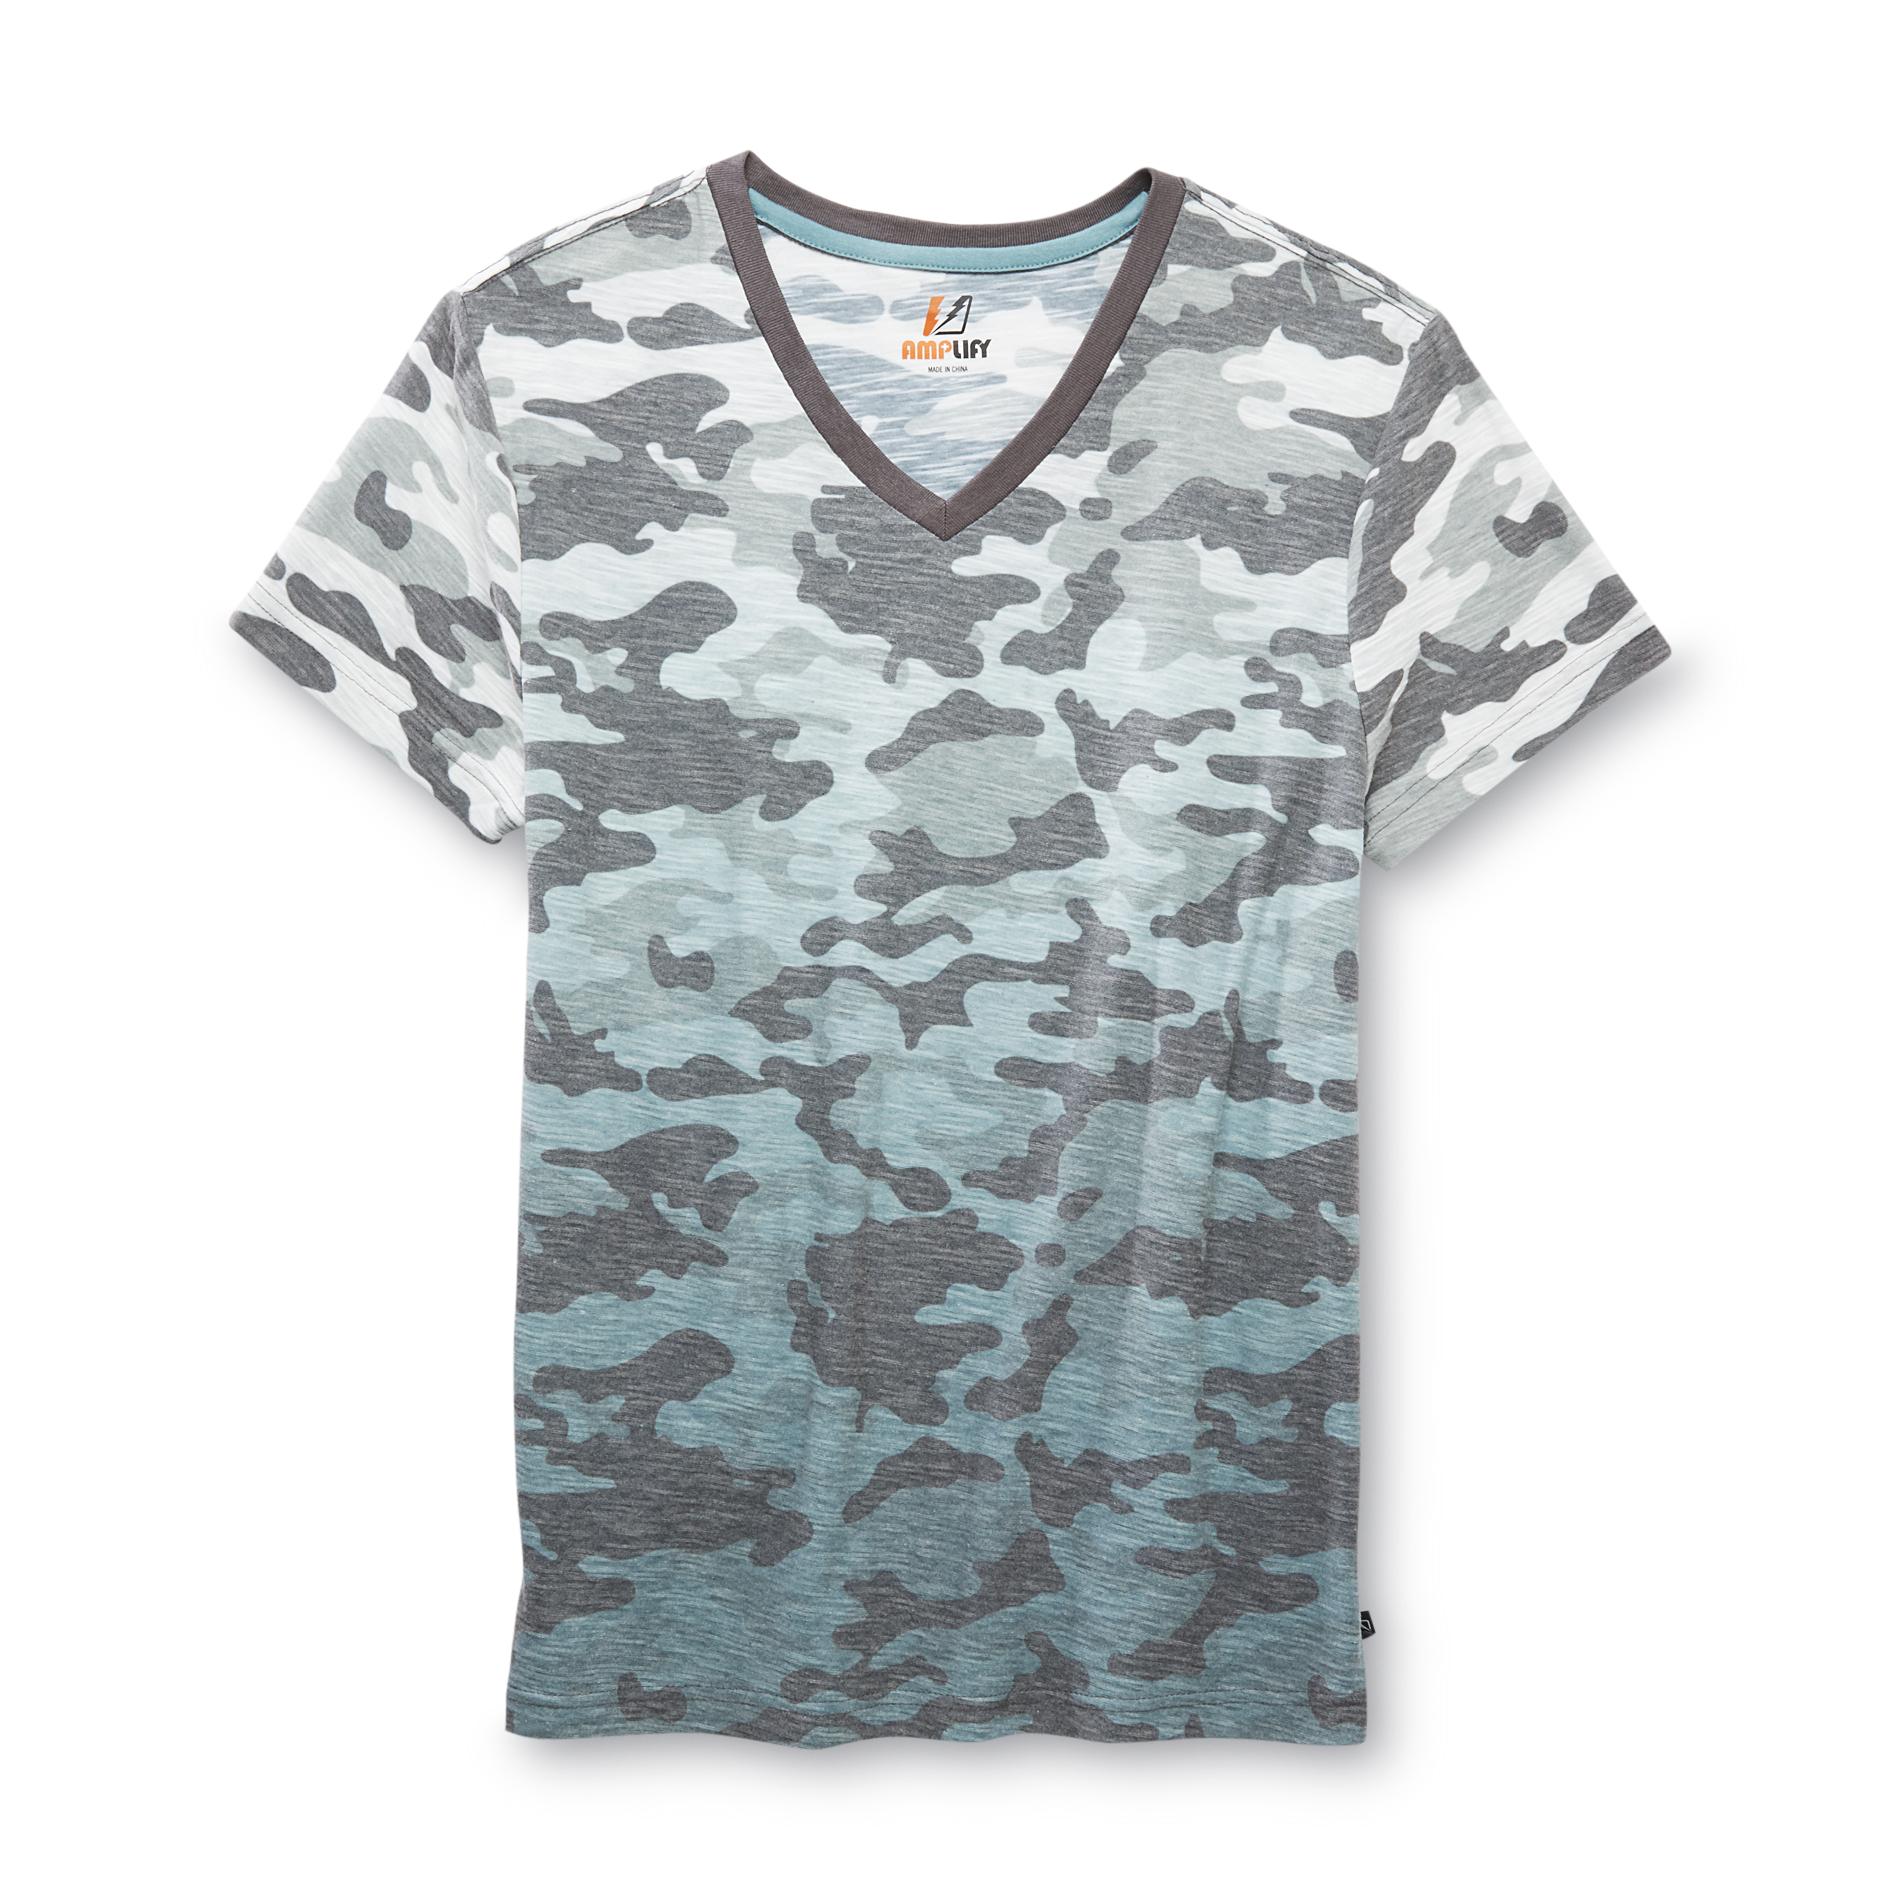 Amplify Young Men's V-Neck T-Shirt - Camouflage